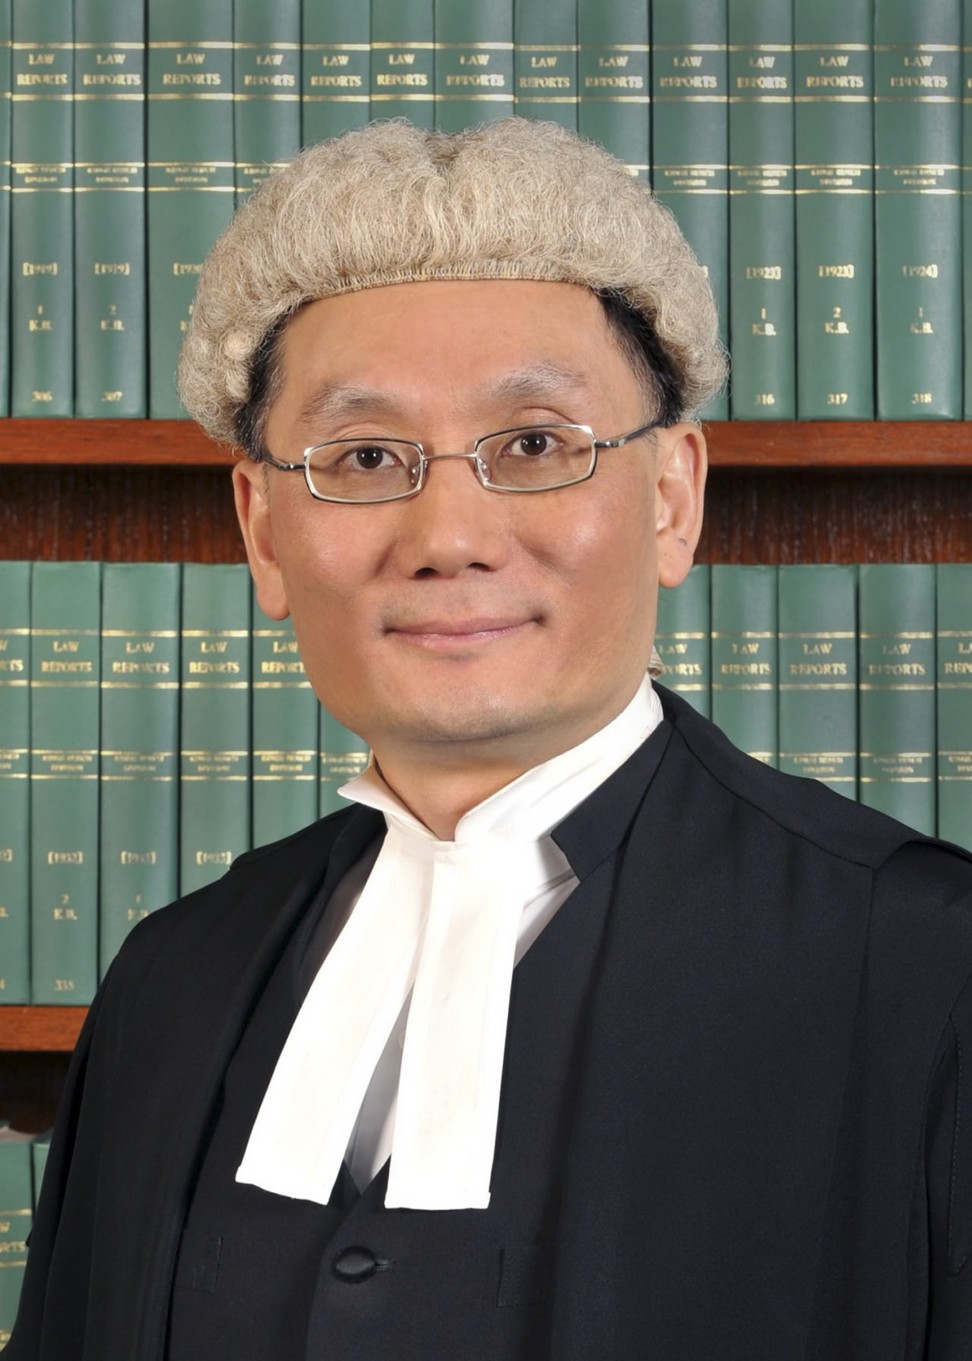 Justice Andrew Cheung is considered to be the front runner to be the city’s next chief justice. Photo: Handout